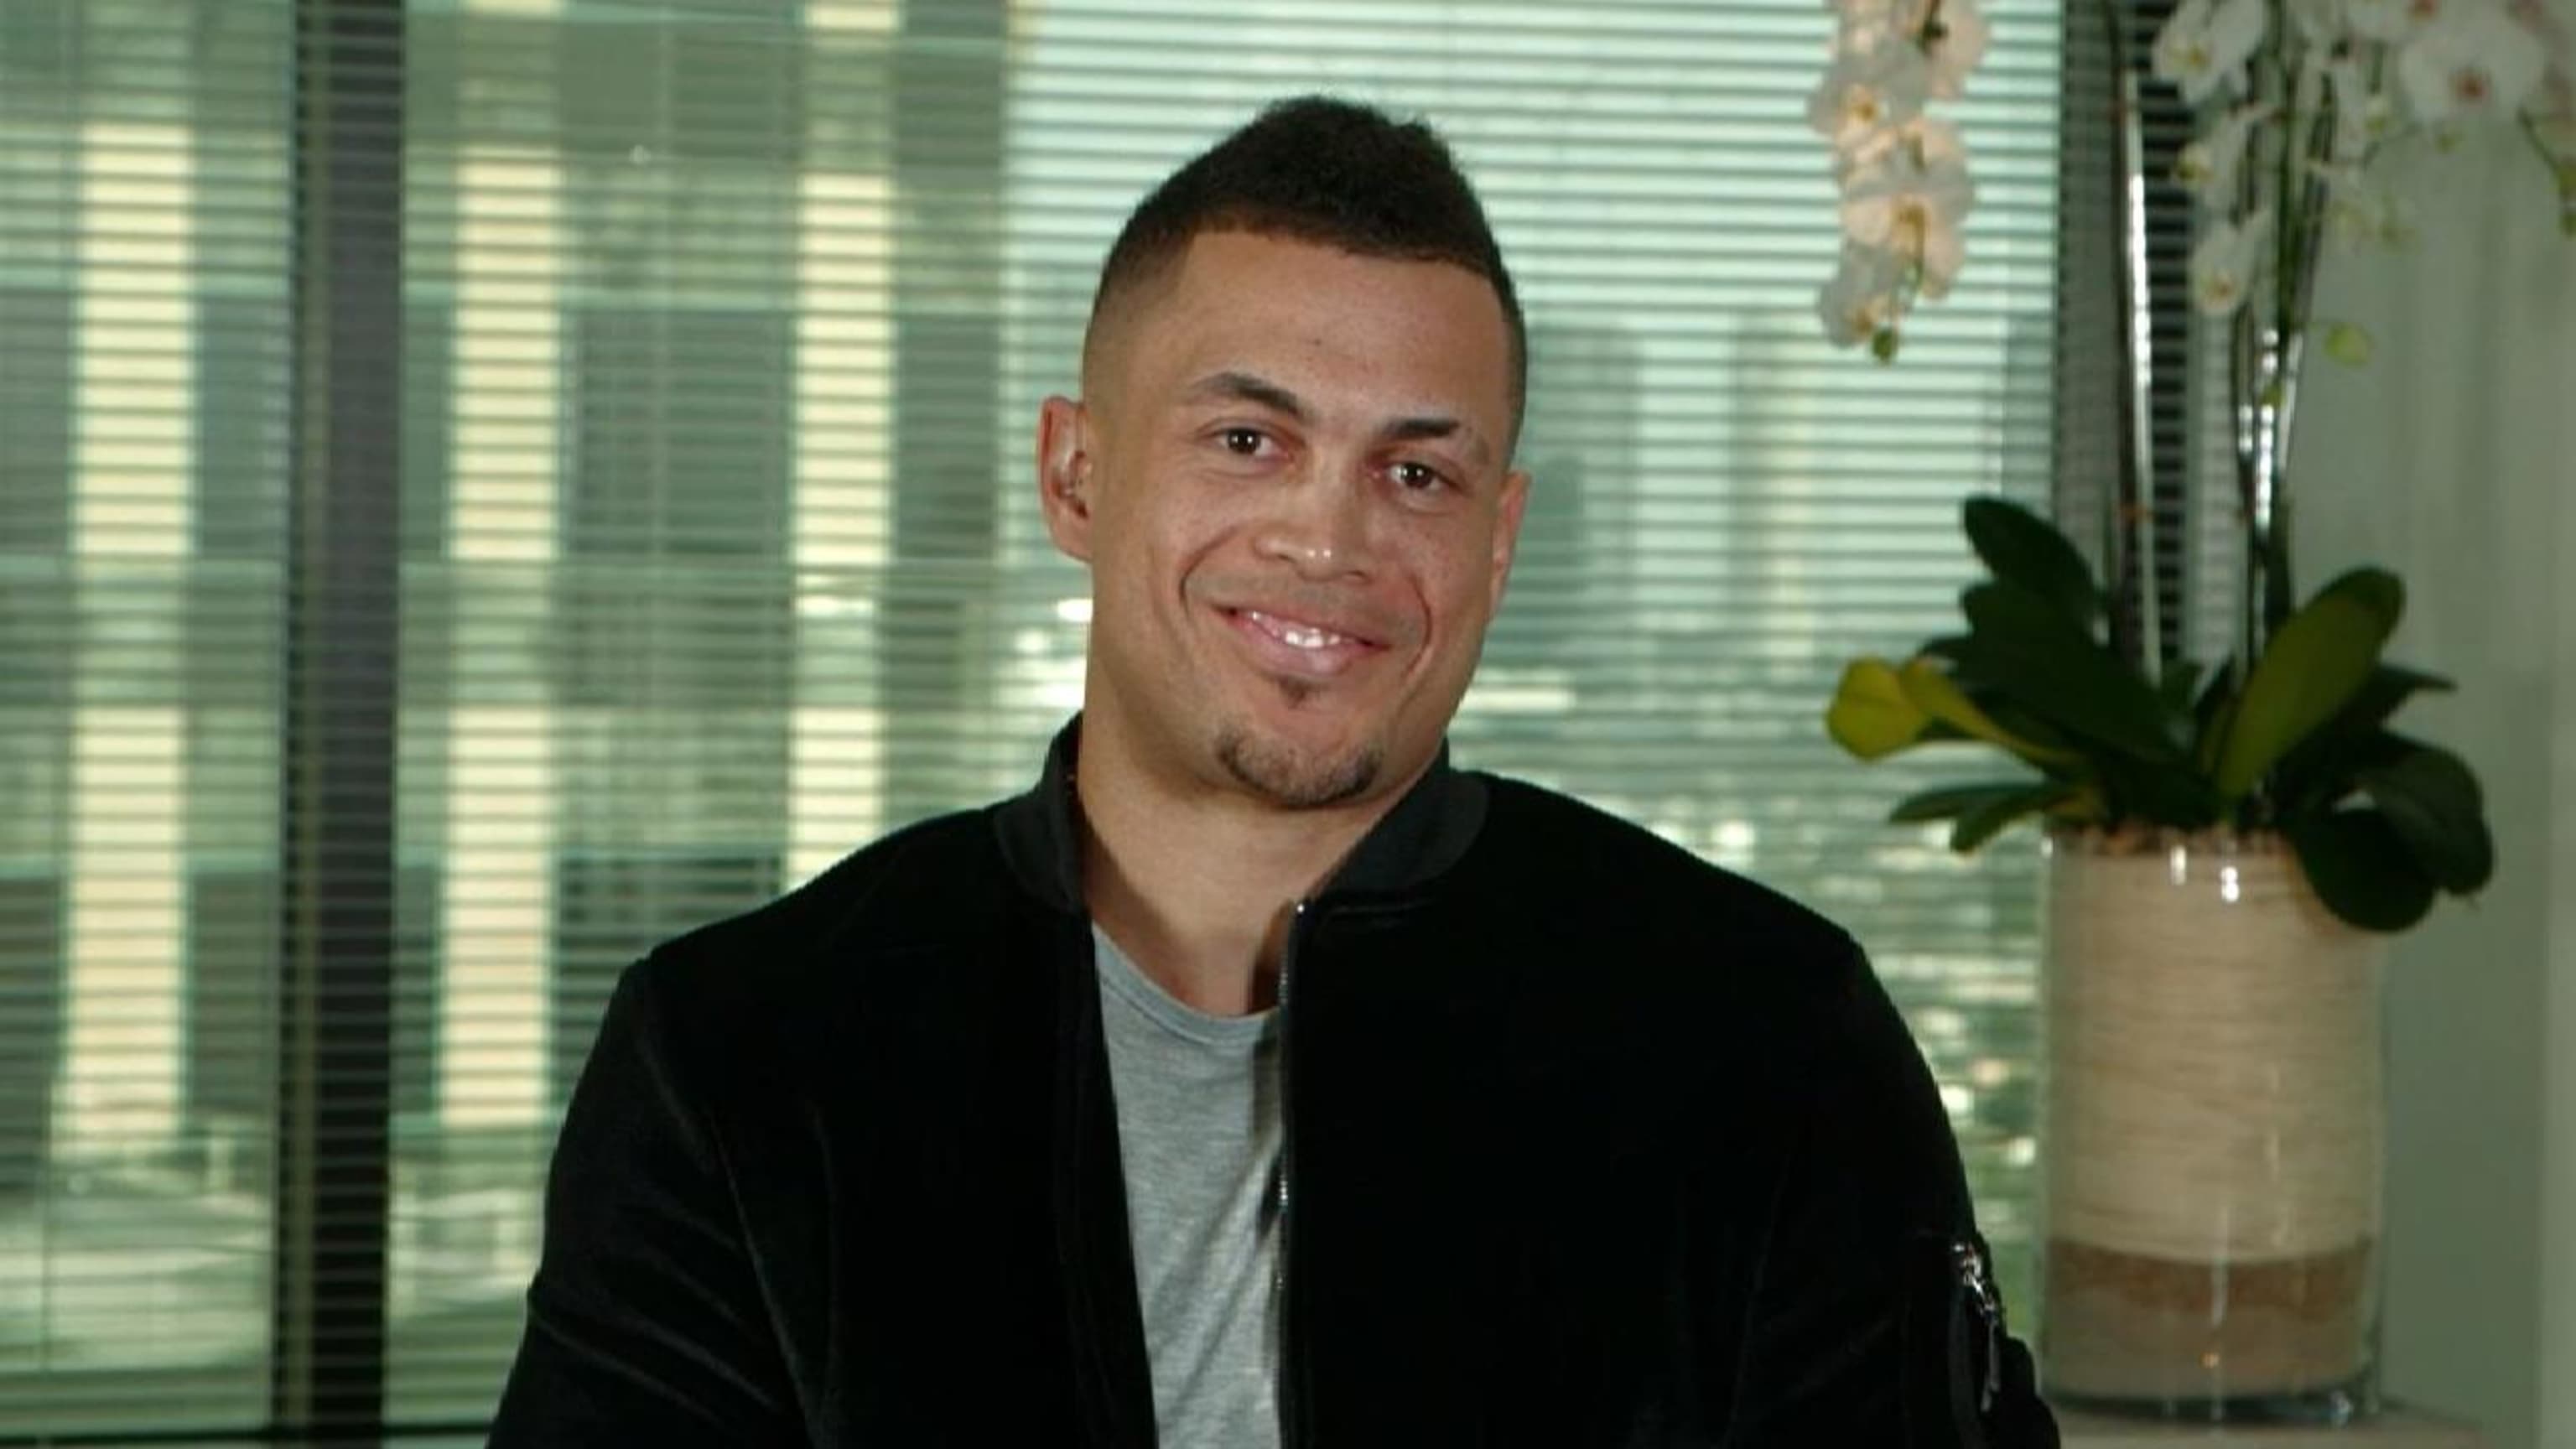 We finally have photographic evidence Giancarlo Stanton is